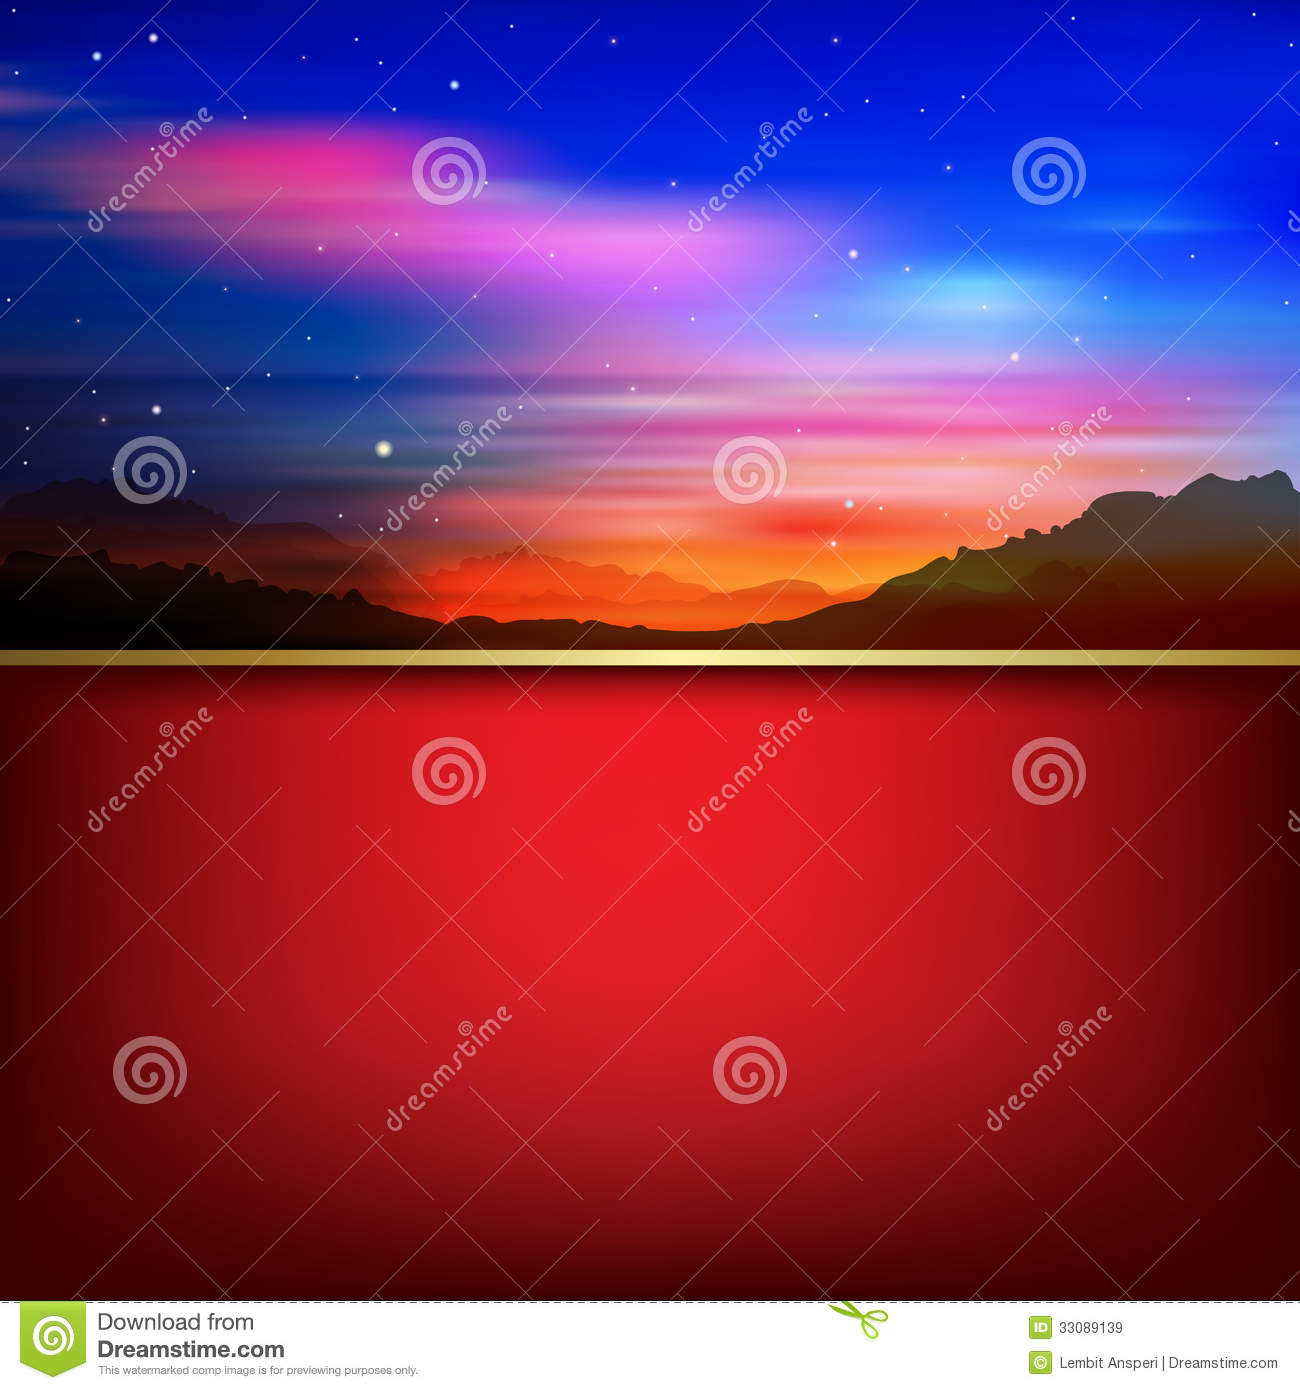 Abstract Background With Sunrise And Mountains Royalty Free Stock    